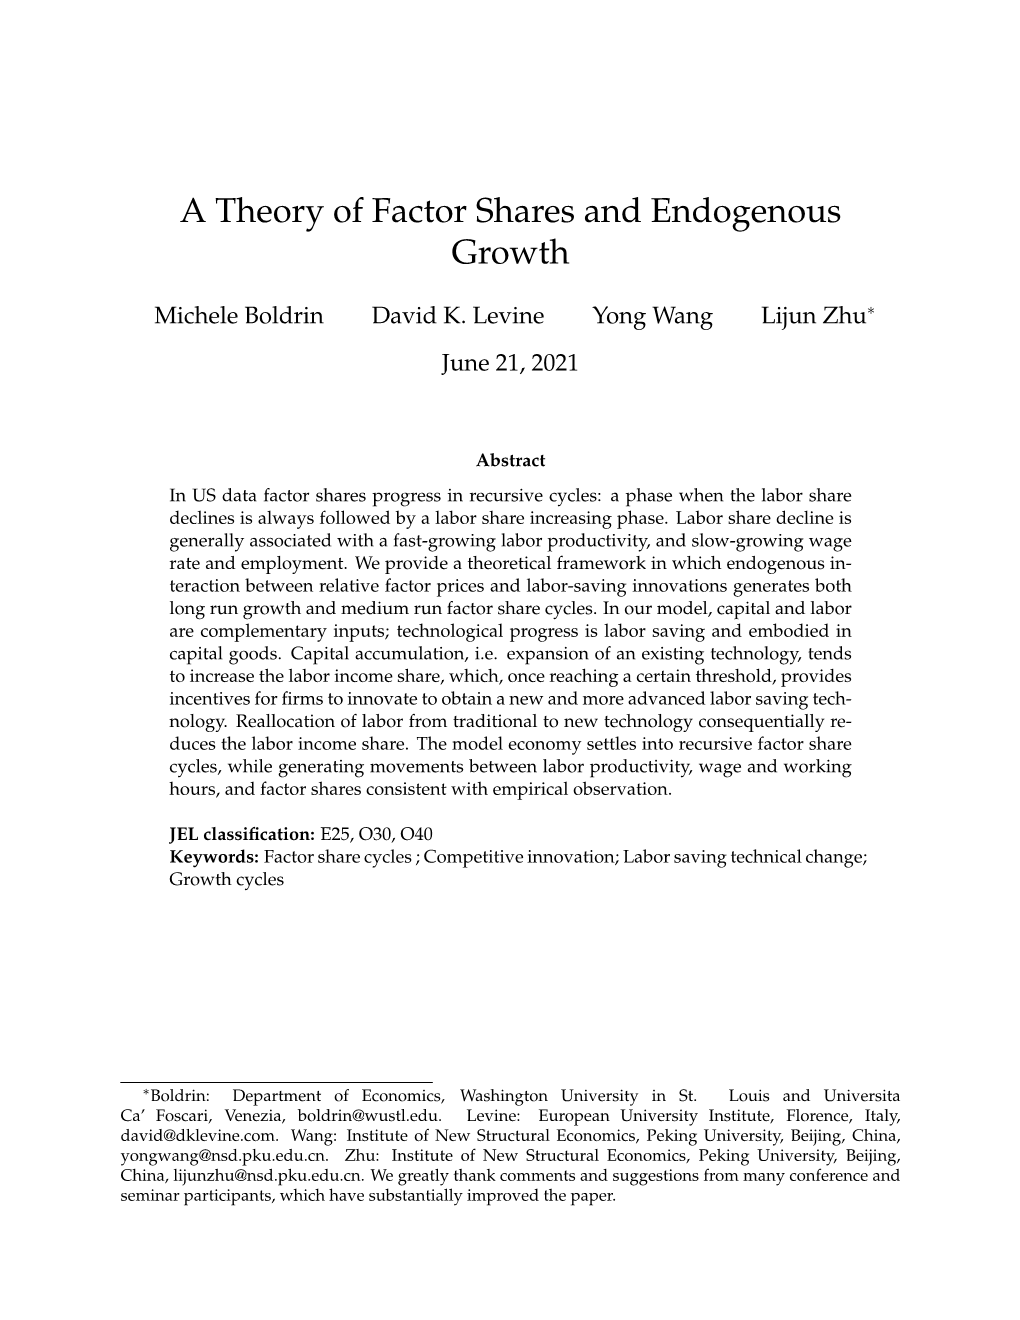 A Theory of Factor Shares and Endogenous Growth